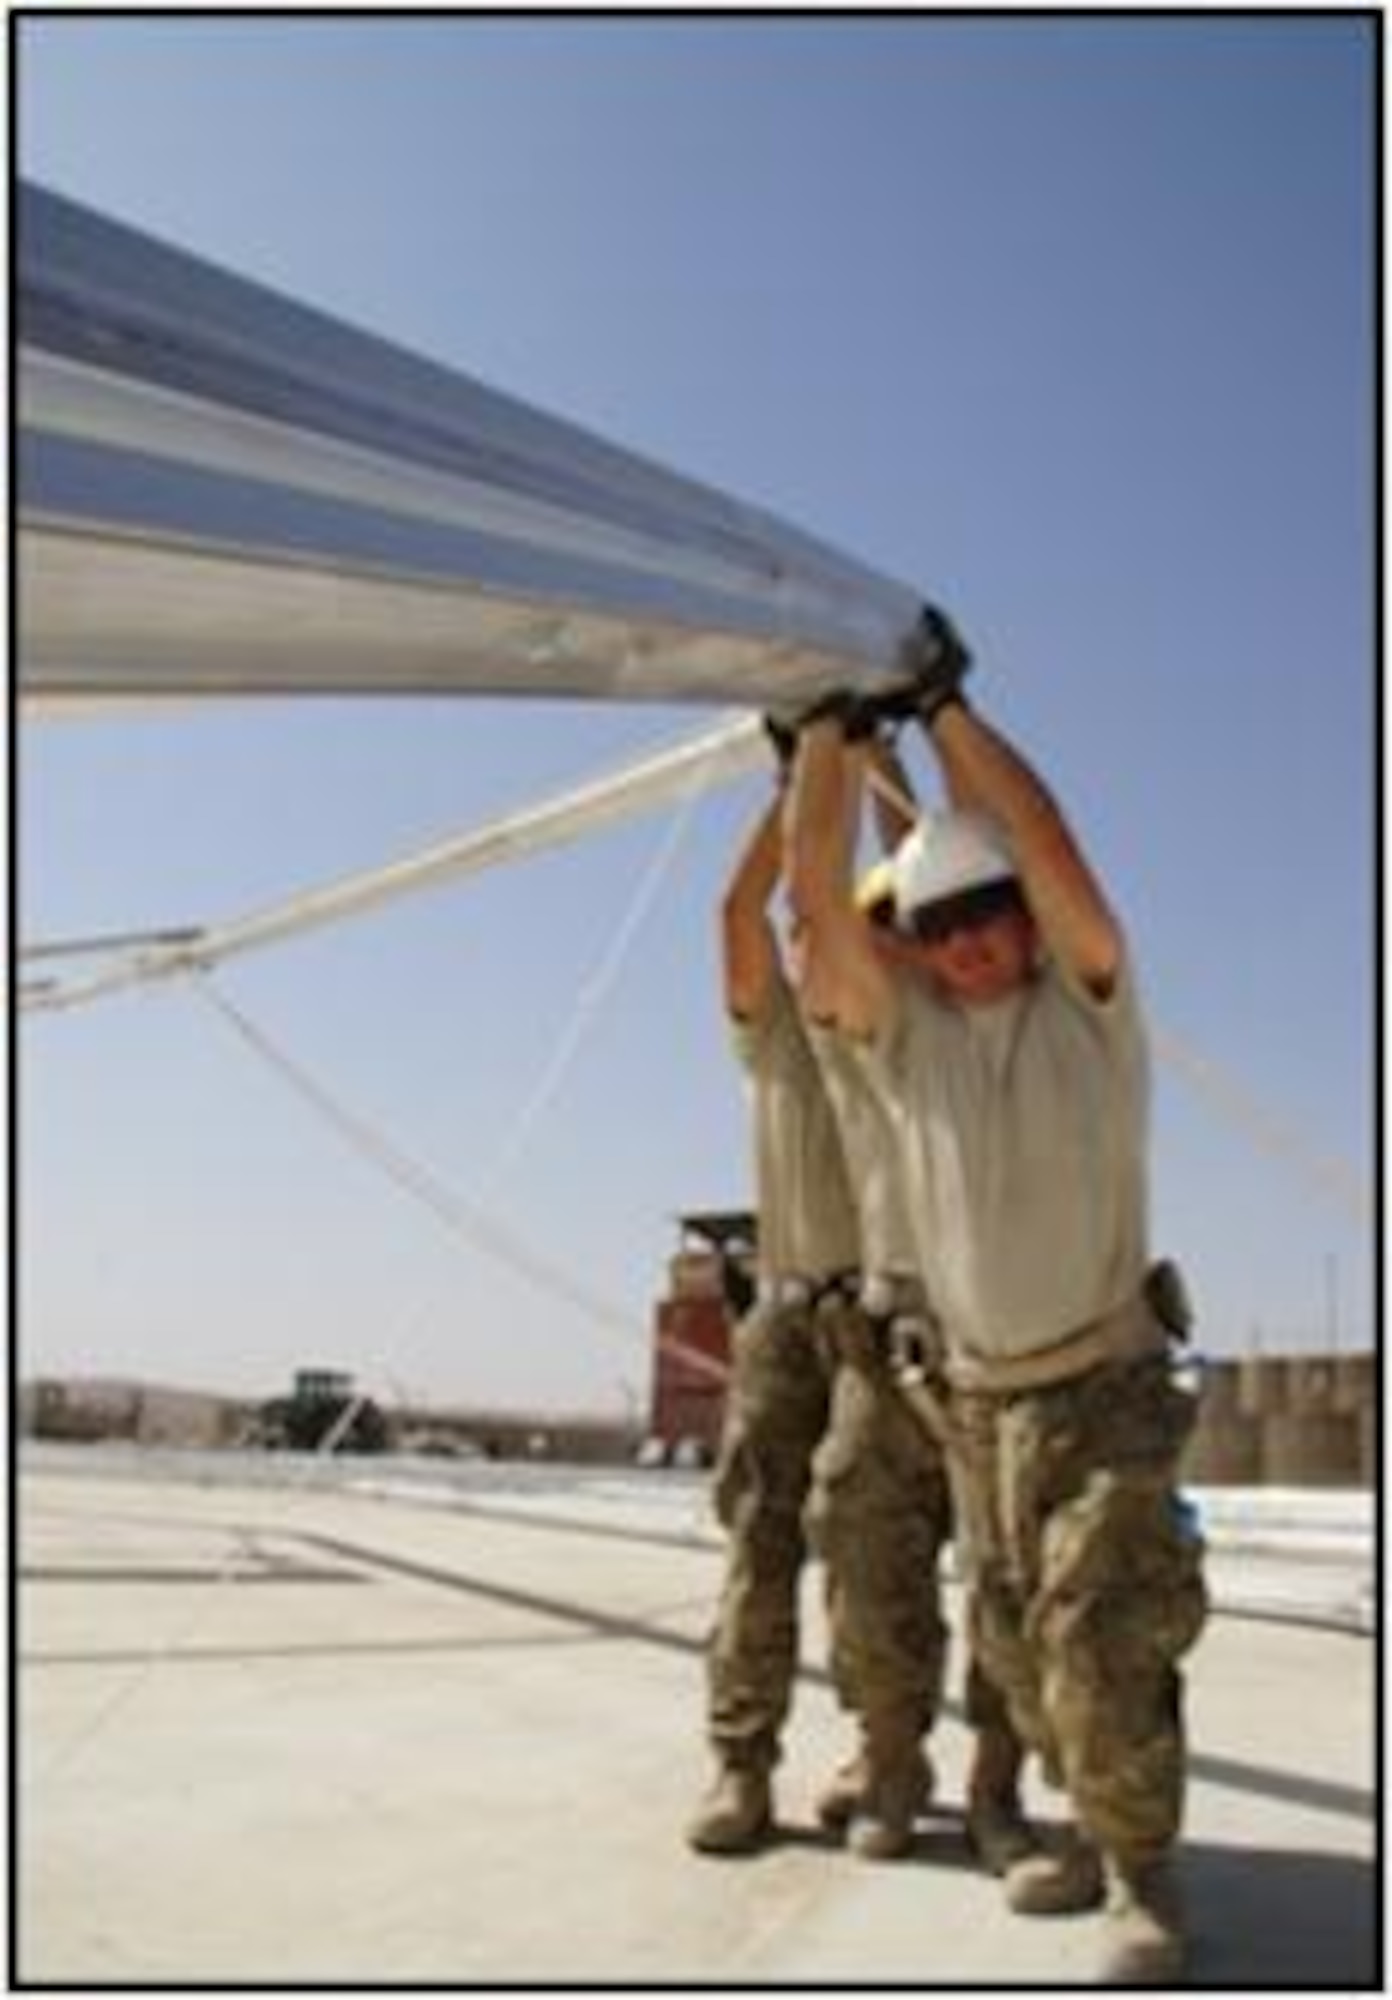 Connecticut Air National Guardsmen position a beam while erecting a Large Aircraft Maintenance Shelter (LAMS) at forward operating base Meymaneh, Afghanistan, last month. Members of the 103rd Civil Engineer Squadron, Connecticut Air National Guard, have  been deployed since July 2011 to the 877th Expeditionary Prime BEEF Squadron. (Photo courtesy of Lt. Col. James Works)